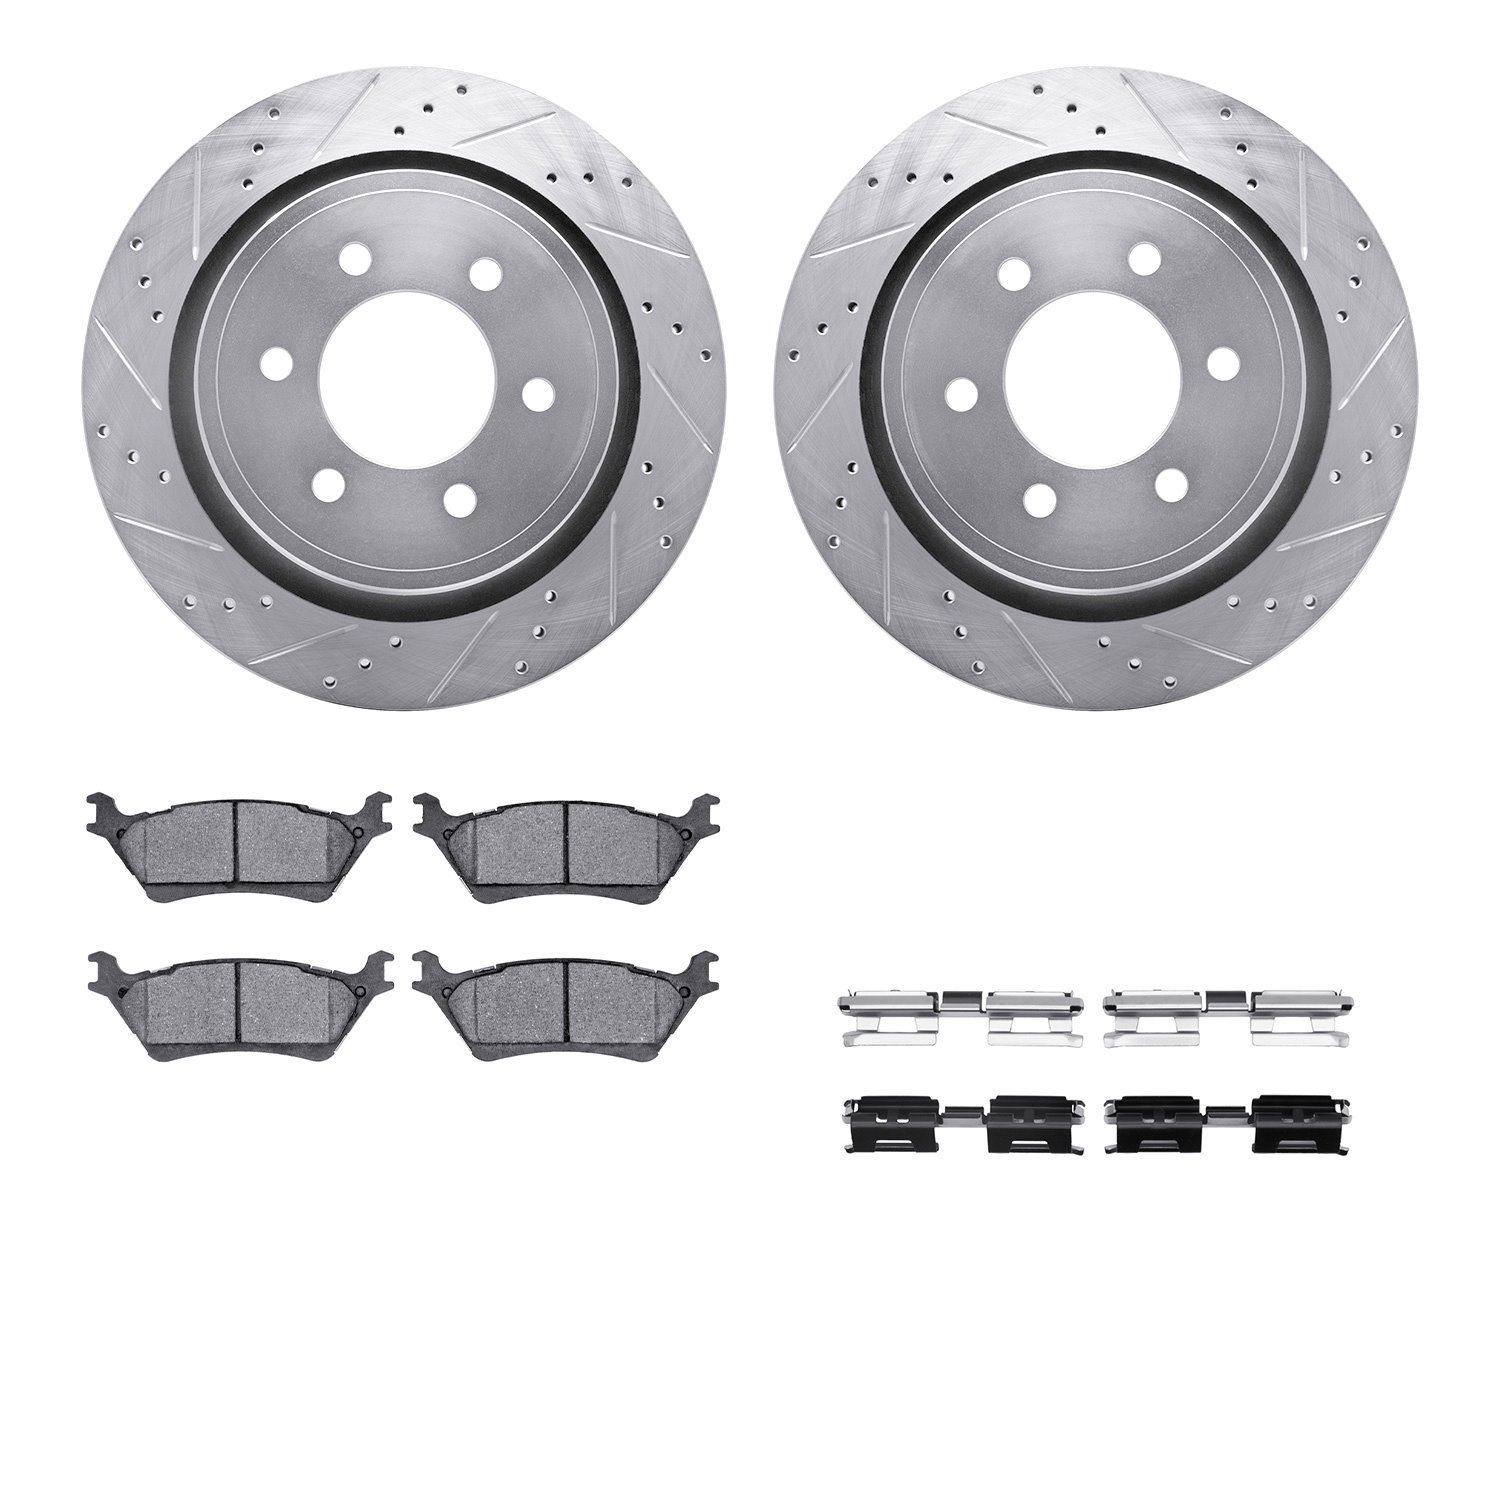 7212-54010 Drilled/Slotted Rotors w/Heavy-Duty Brake Pads Kit & Hardware [Silver], 2012-2020 Ford/Lincoln/Mercury/Mazda, Positio